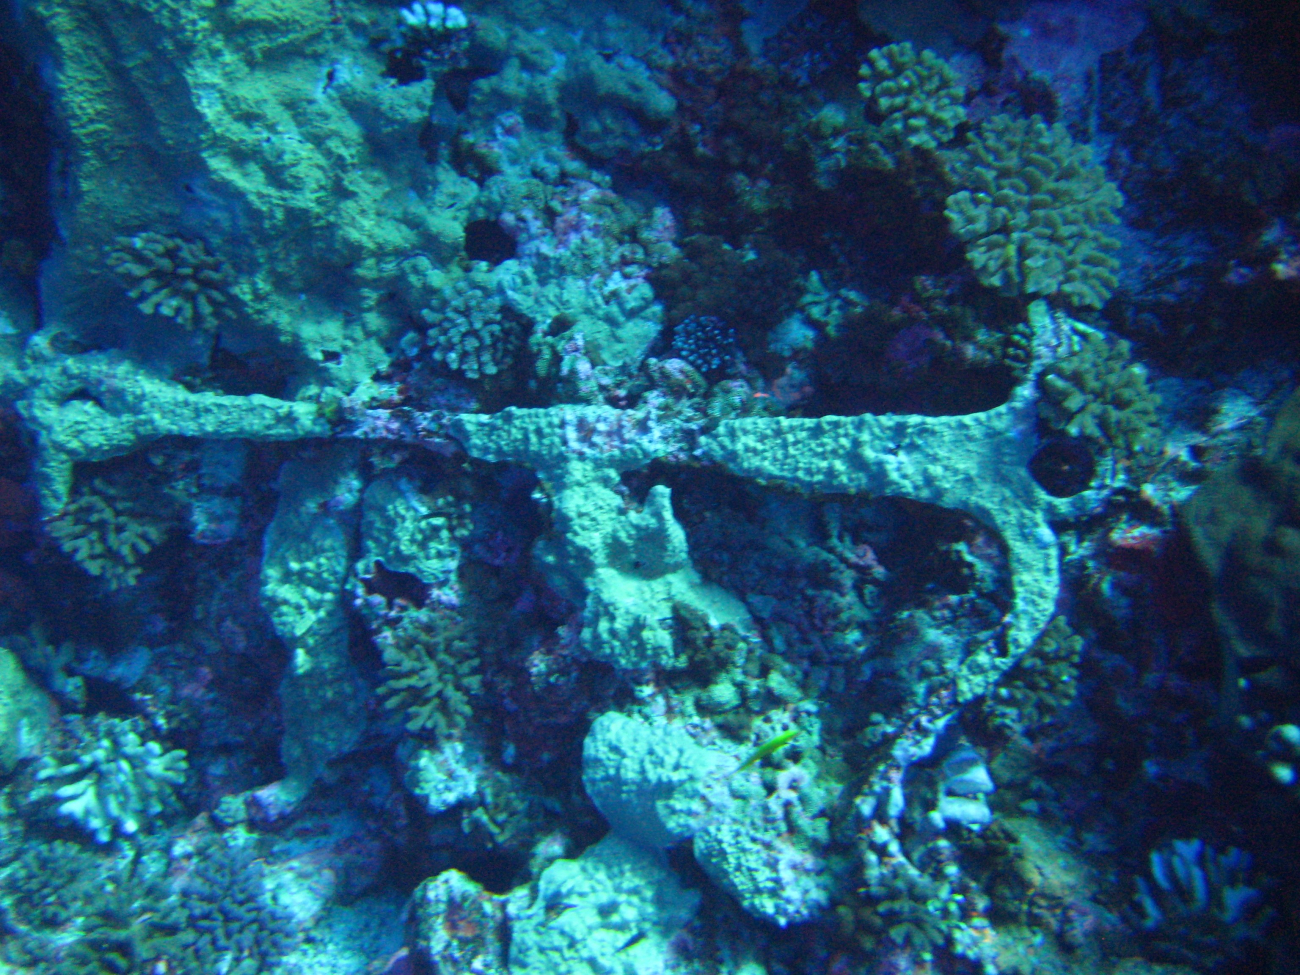 A lost anchor - just fouled? or possibly a shipwreck?